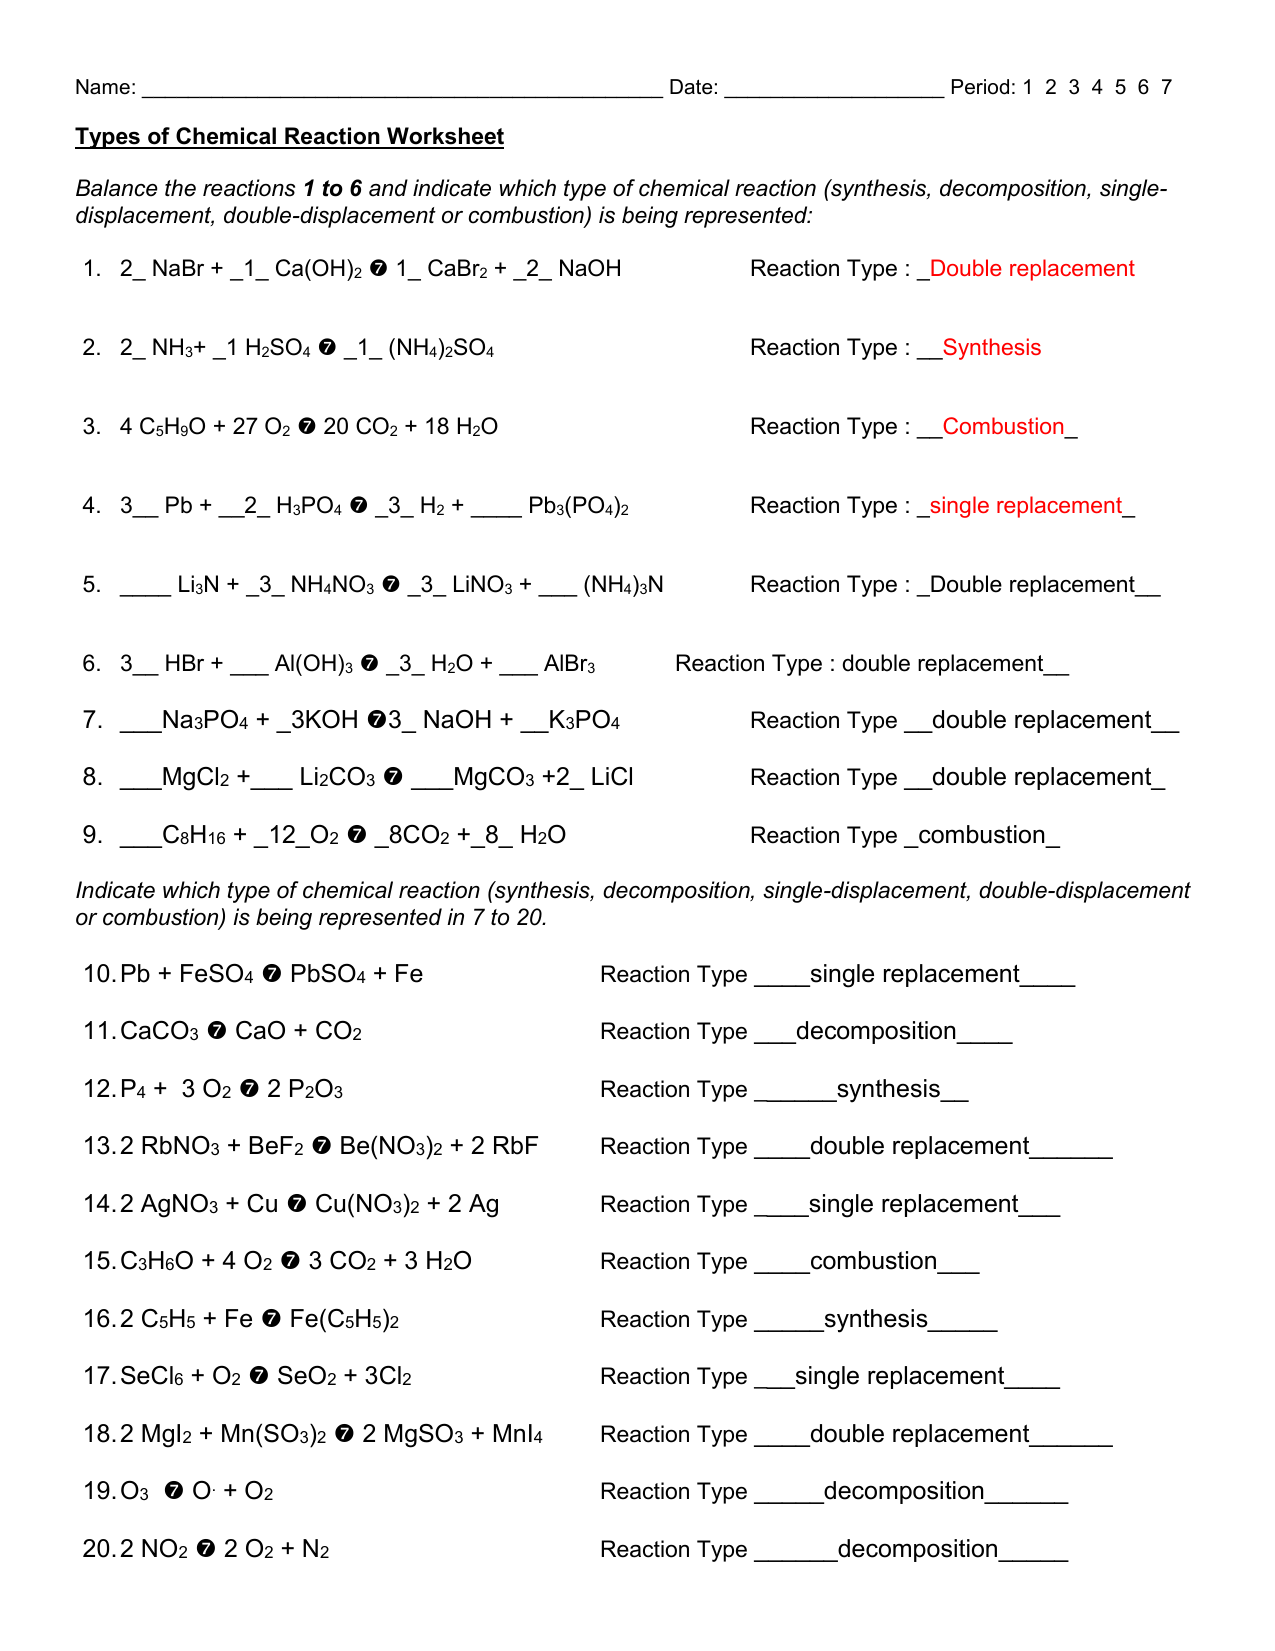 Types of Chemical Reaction Worksheetanswers With Regard To Chemical Reactions Types Worksheet